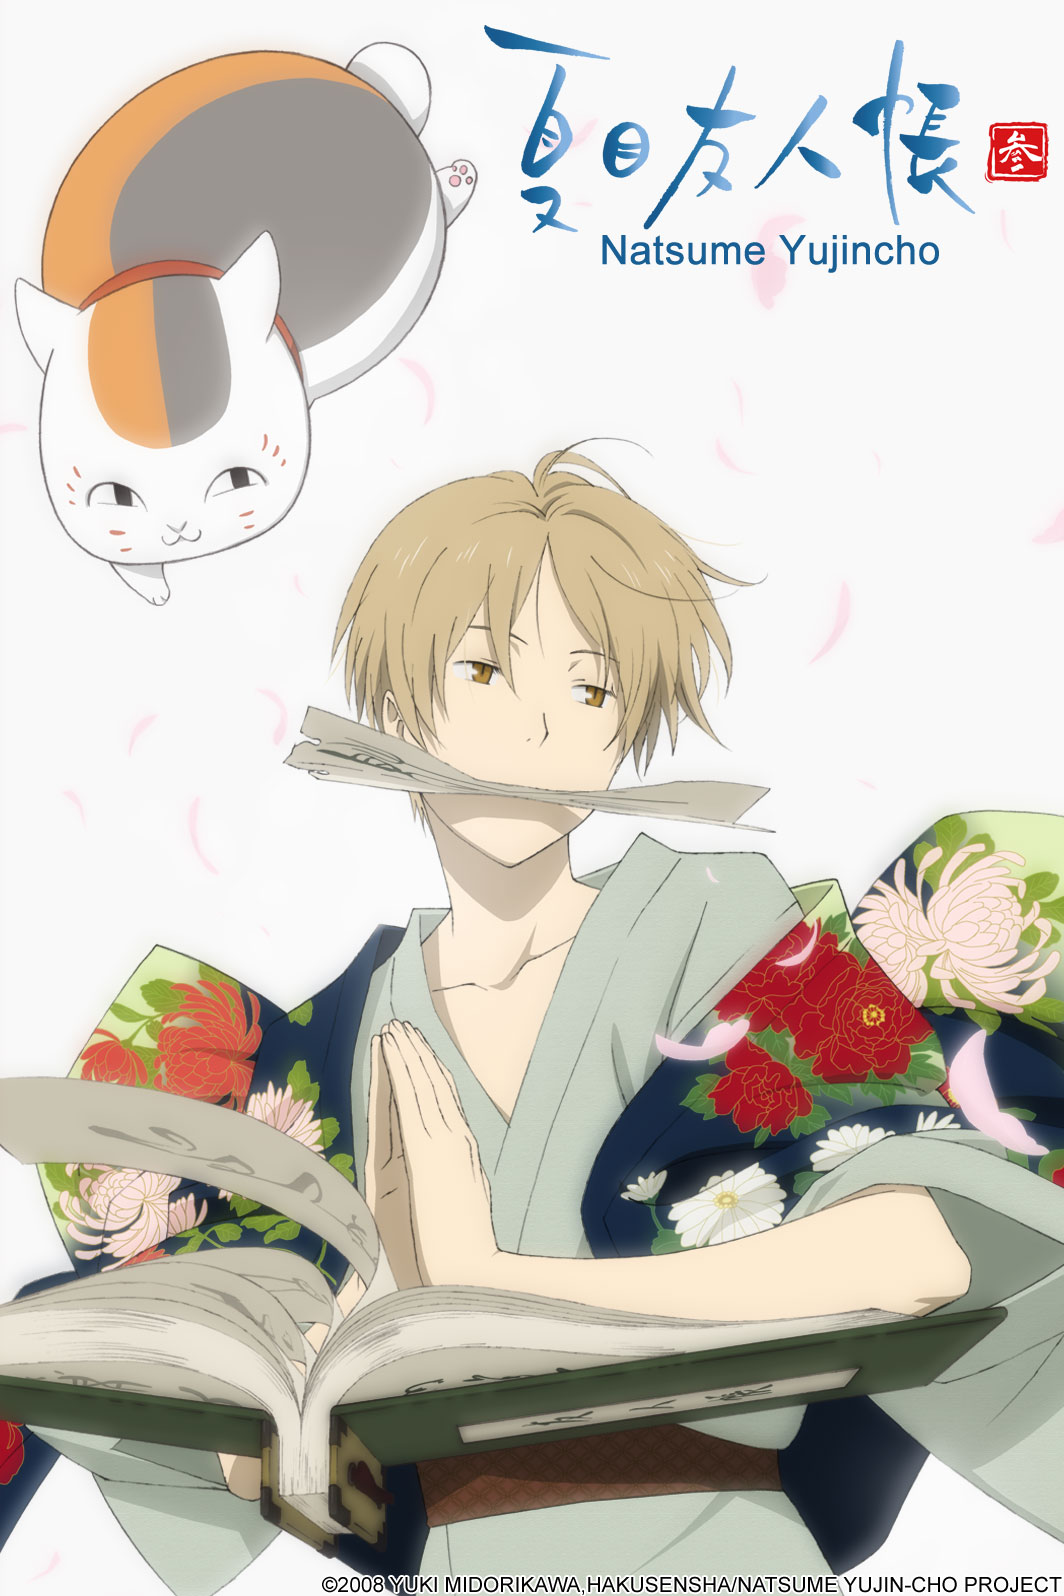 English Dub Review: Natsume’s Book of Friends “Following a Narrow Path”